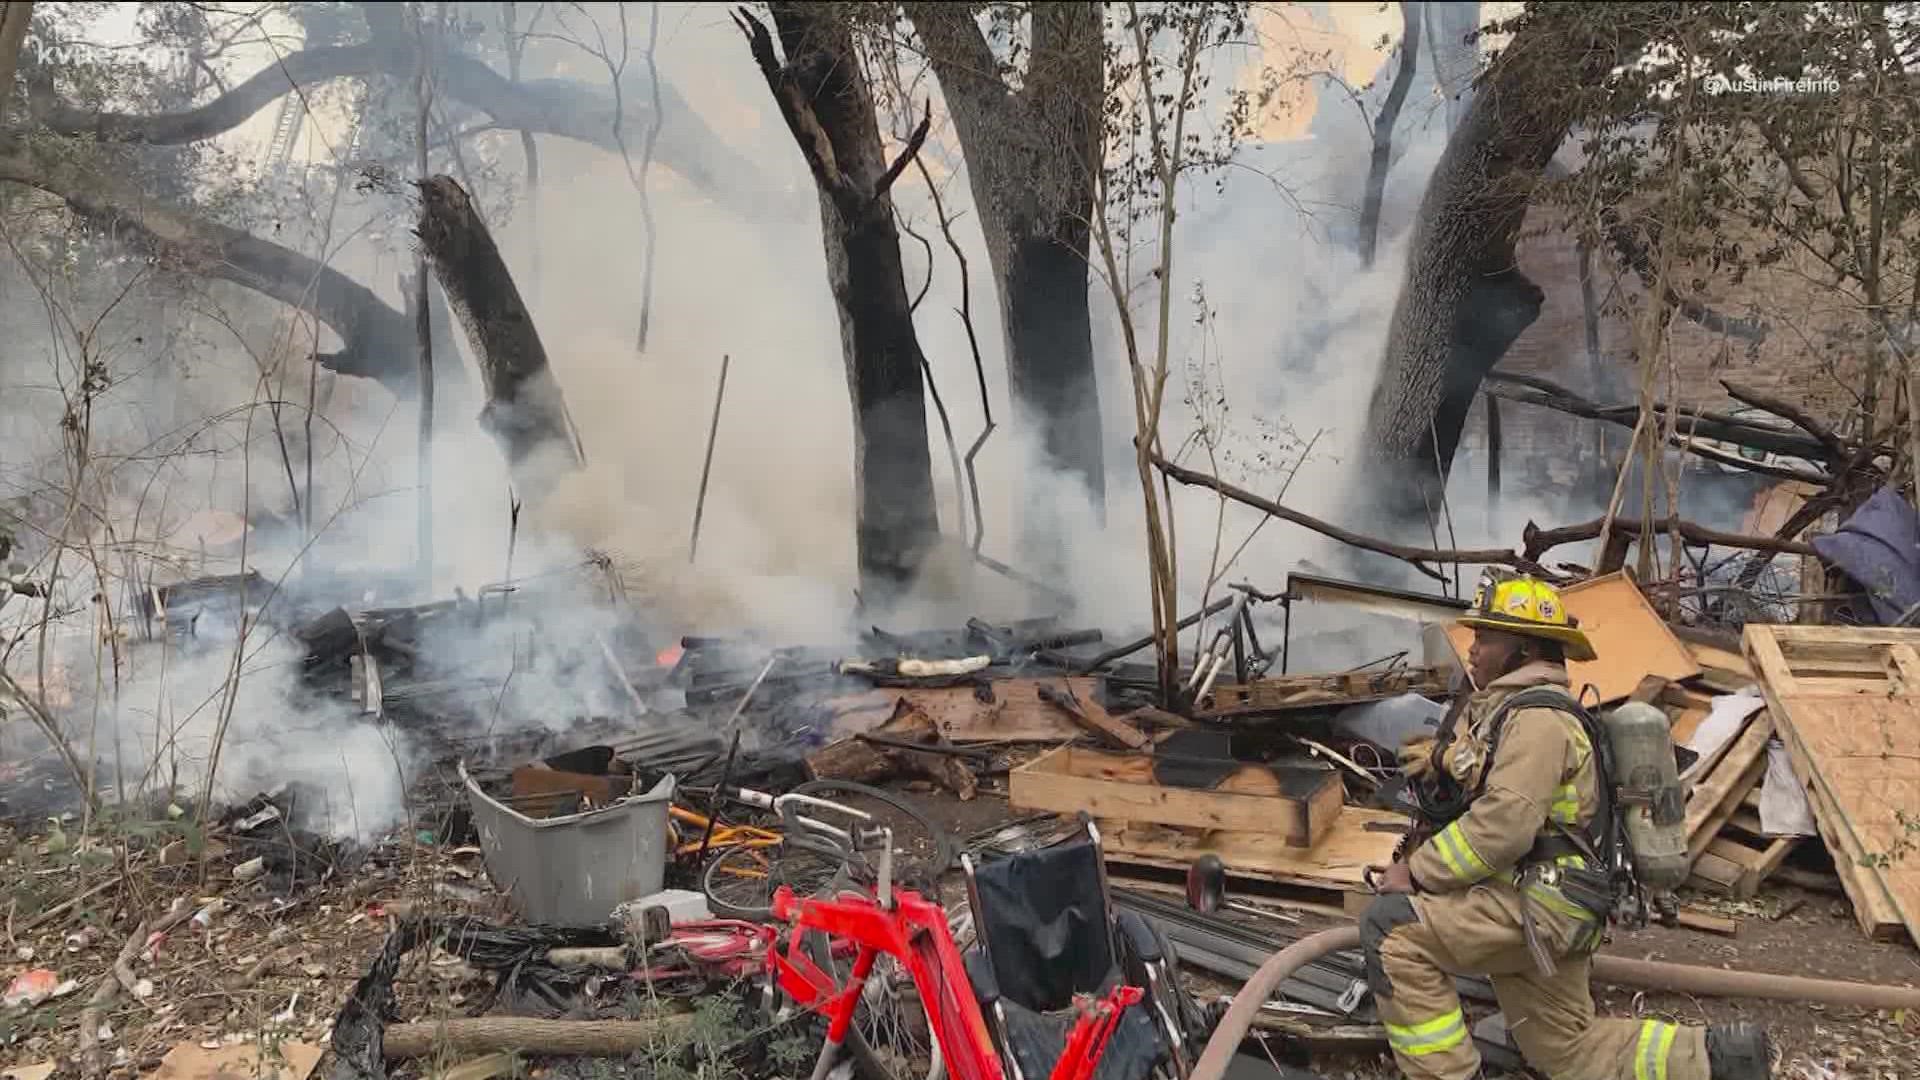 The AFD said the fire happened in the 600 block of Bastrop Highway.